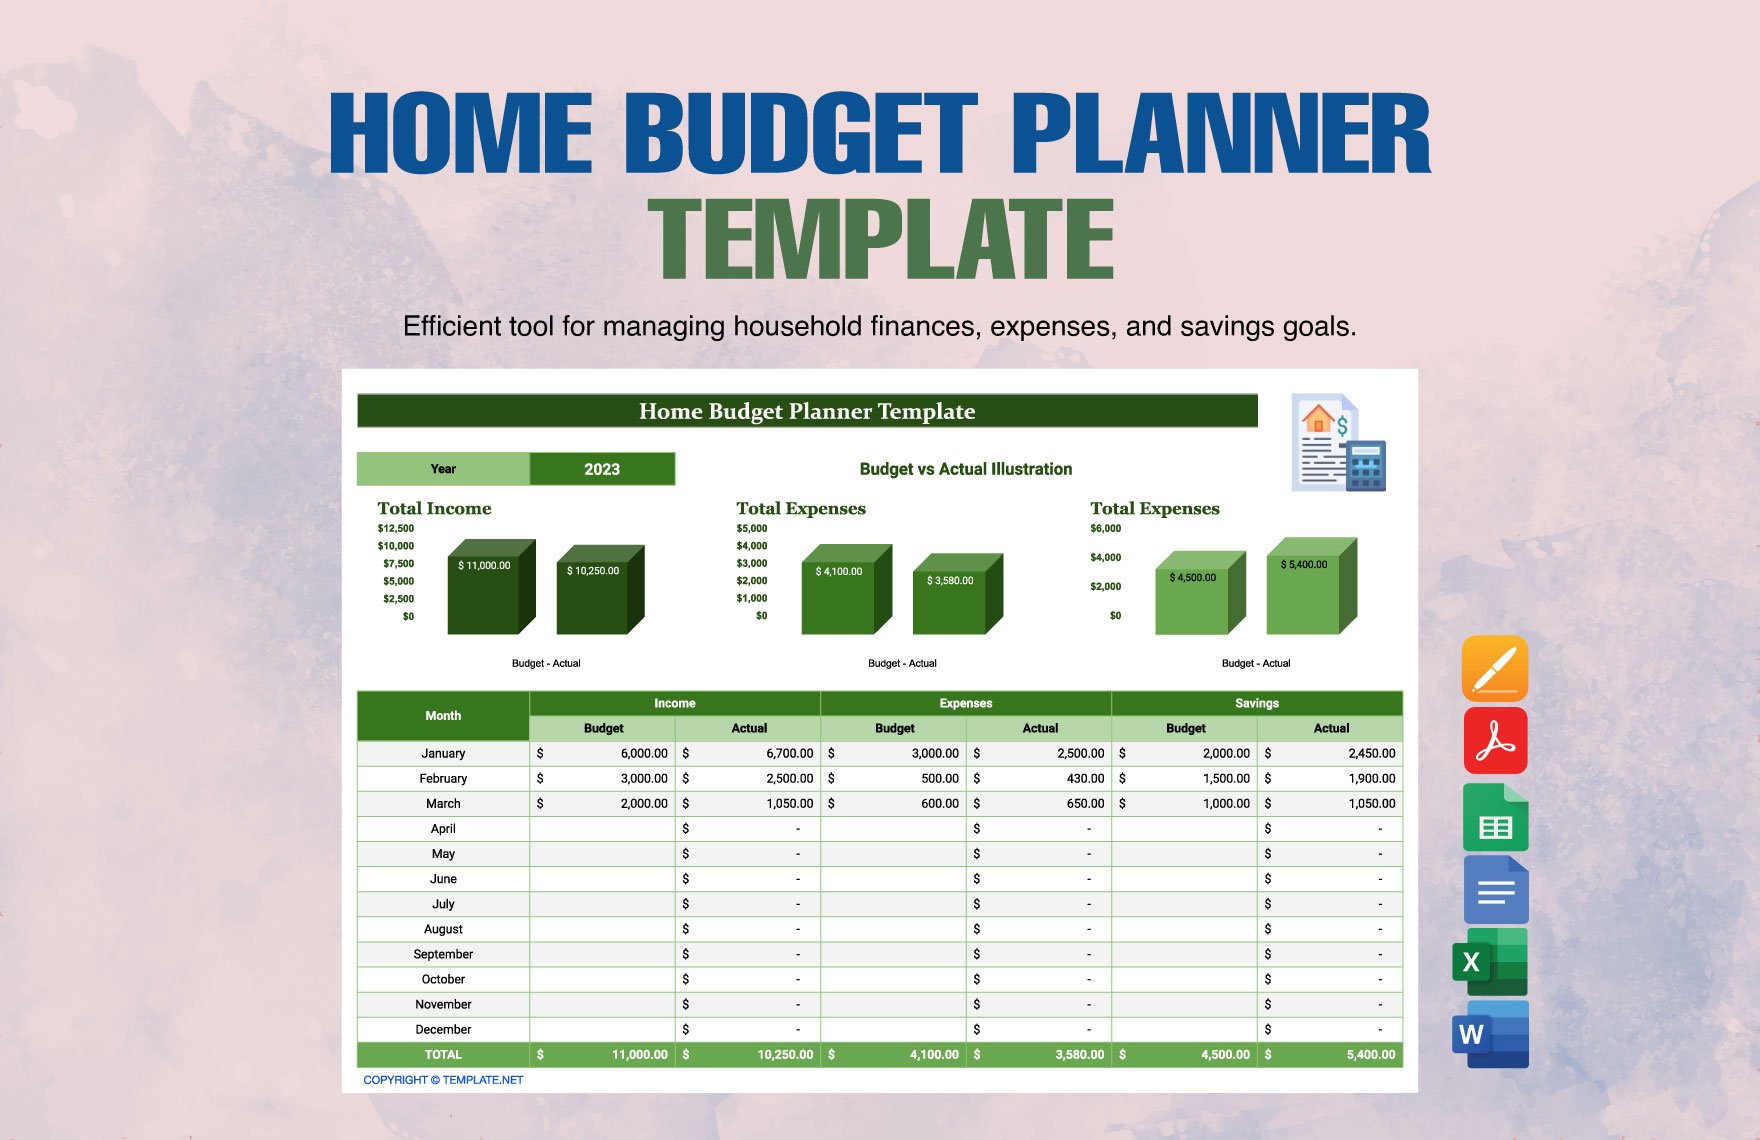 Home Budget Planner Template in Word, Google Docs, Excel, PDF, Google Sheets, Apple Pages